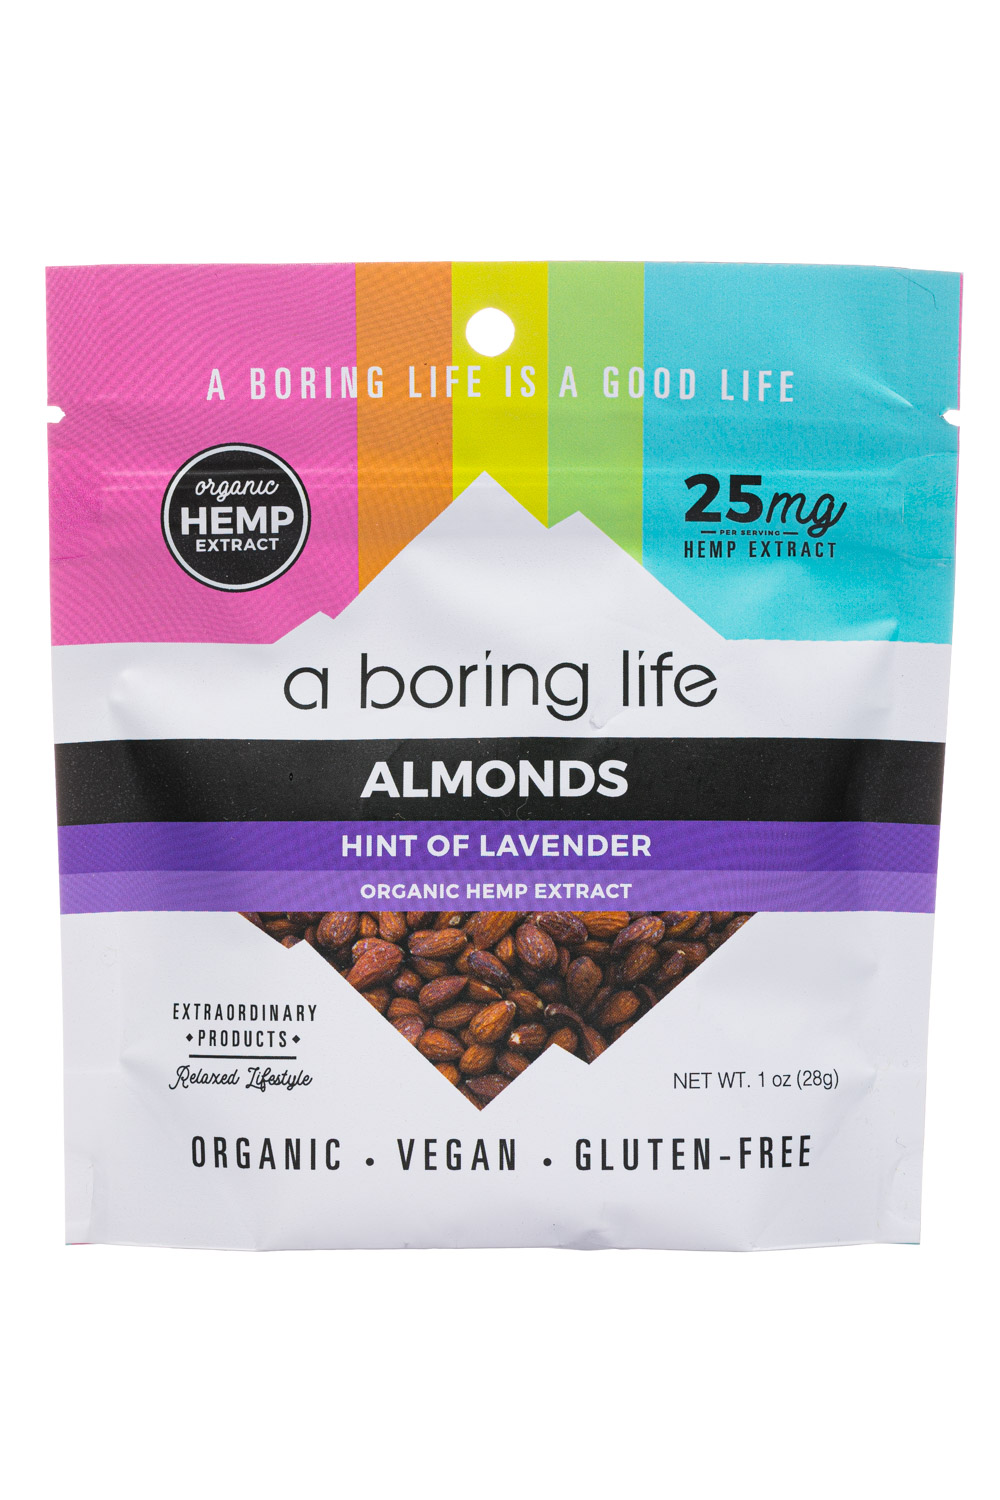 Almonds - Hint of Lavender